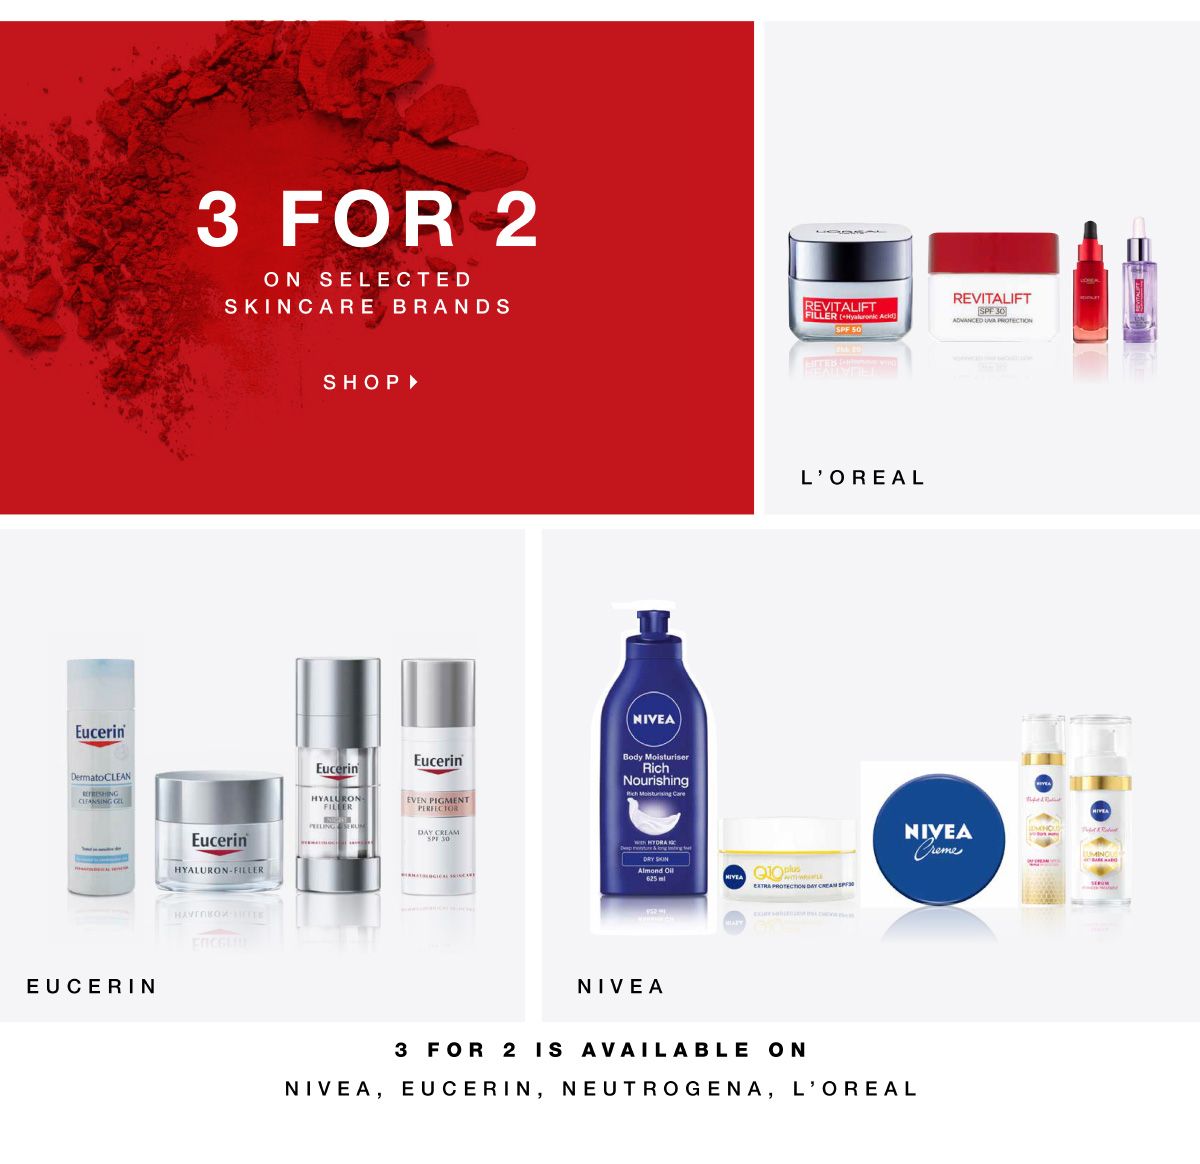 3 FOR 2 ON SELECTED SKINCARE BRANDS. SHOP NOW